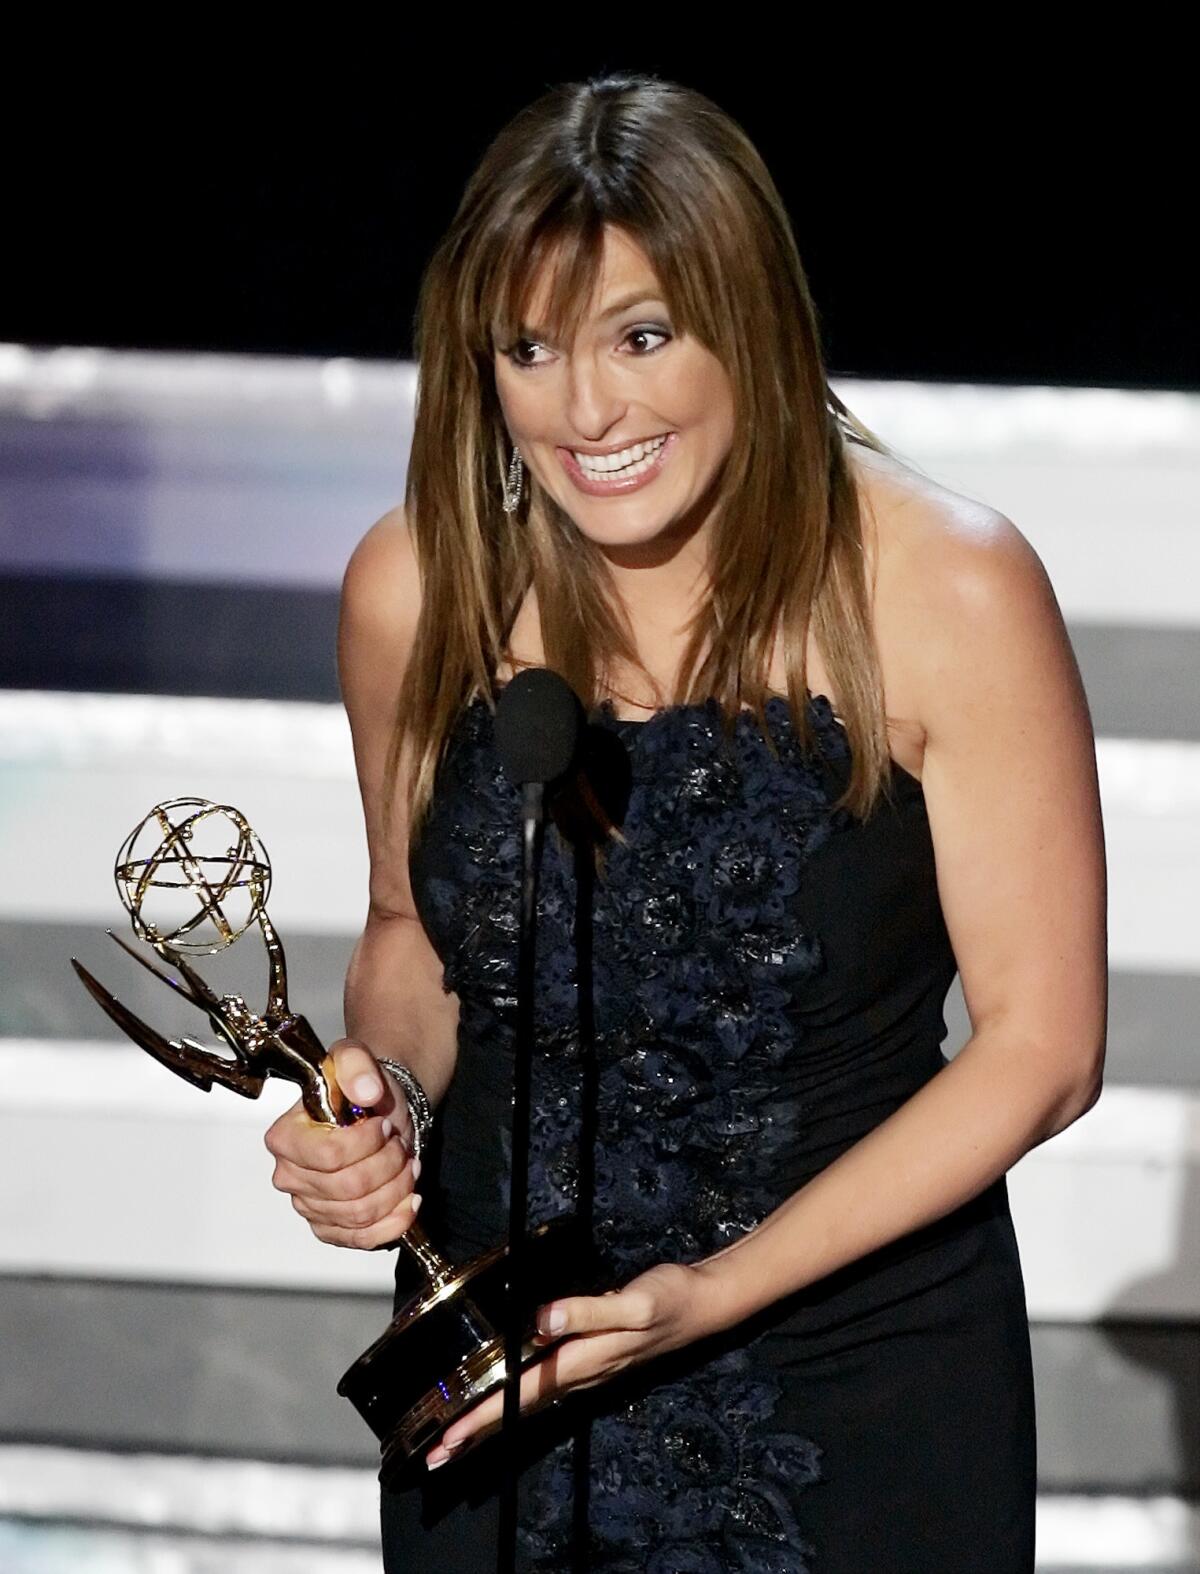 Mariska Hargitay accepts the award for lead actress in a drama series for her work on "Law & Order: Special Victims Unit" at the 58th Primetime Emmy Awards in 2006.